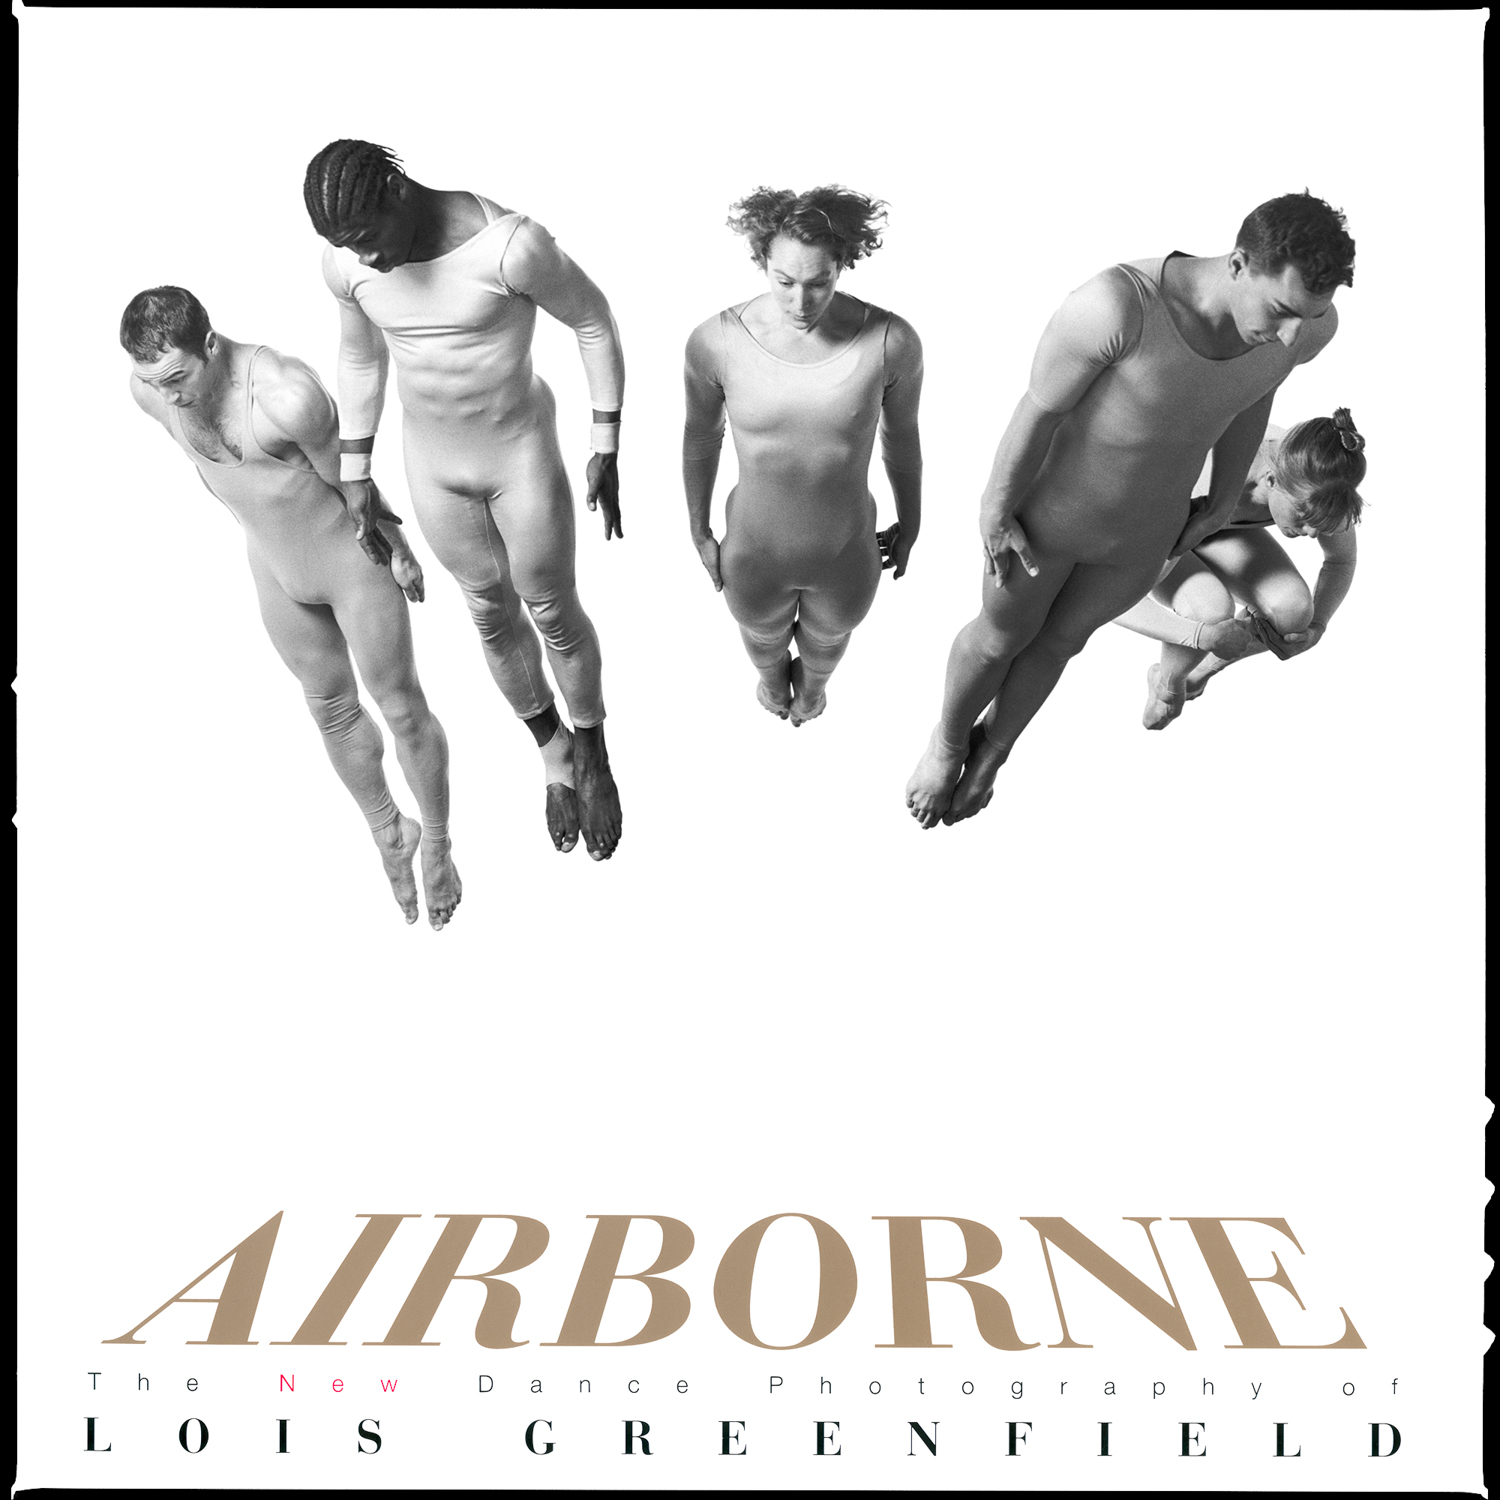  With  Airborne &nbsp;(1998), Lois Greenfield takes us to spectacular new heights, capturing moments of startling grace and power. In this second volume,&nbsp;Lois incorporates fabrics and props into her imaginary scenarios,&nbsp;adding to their myst